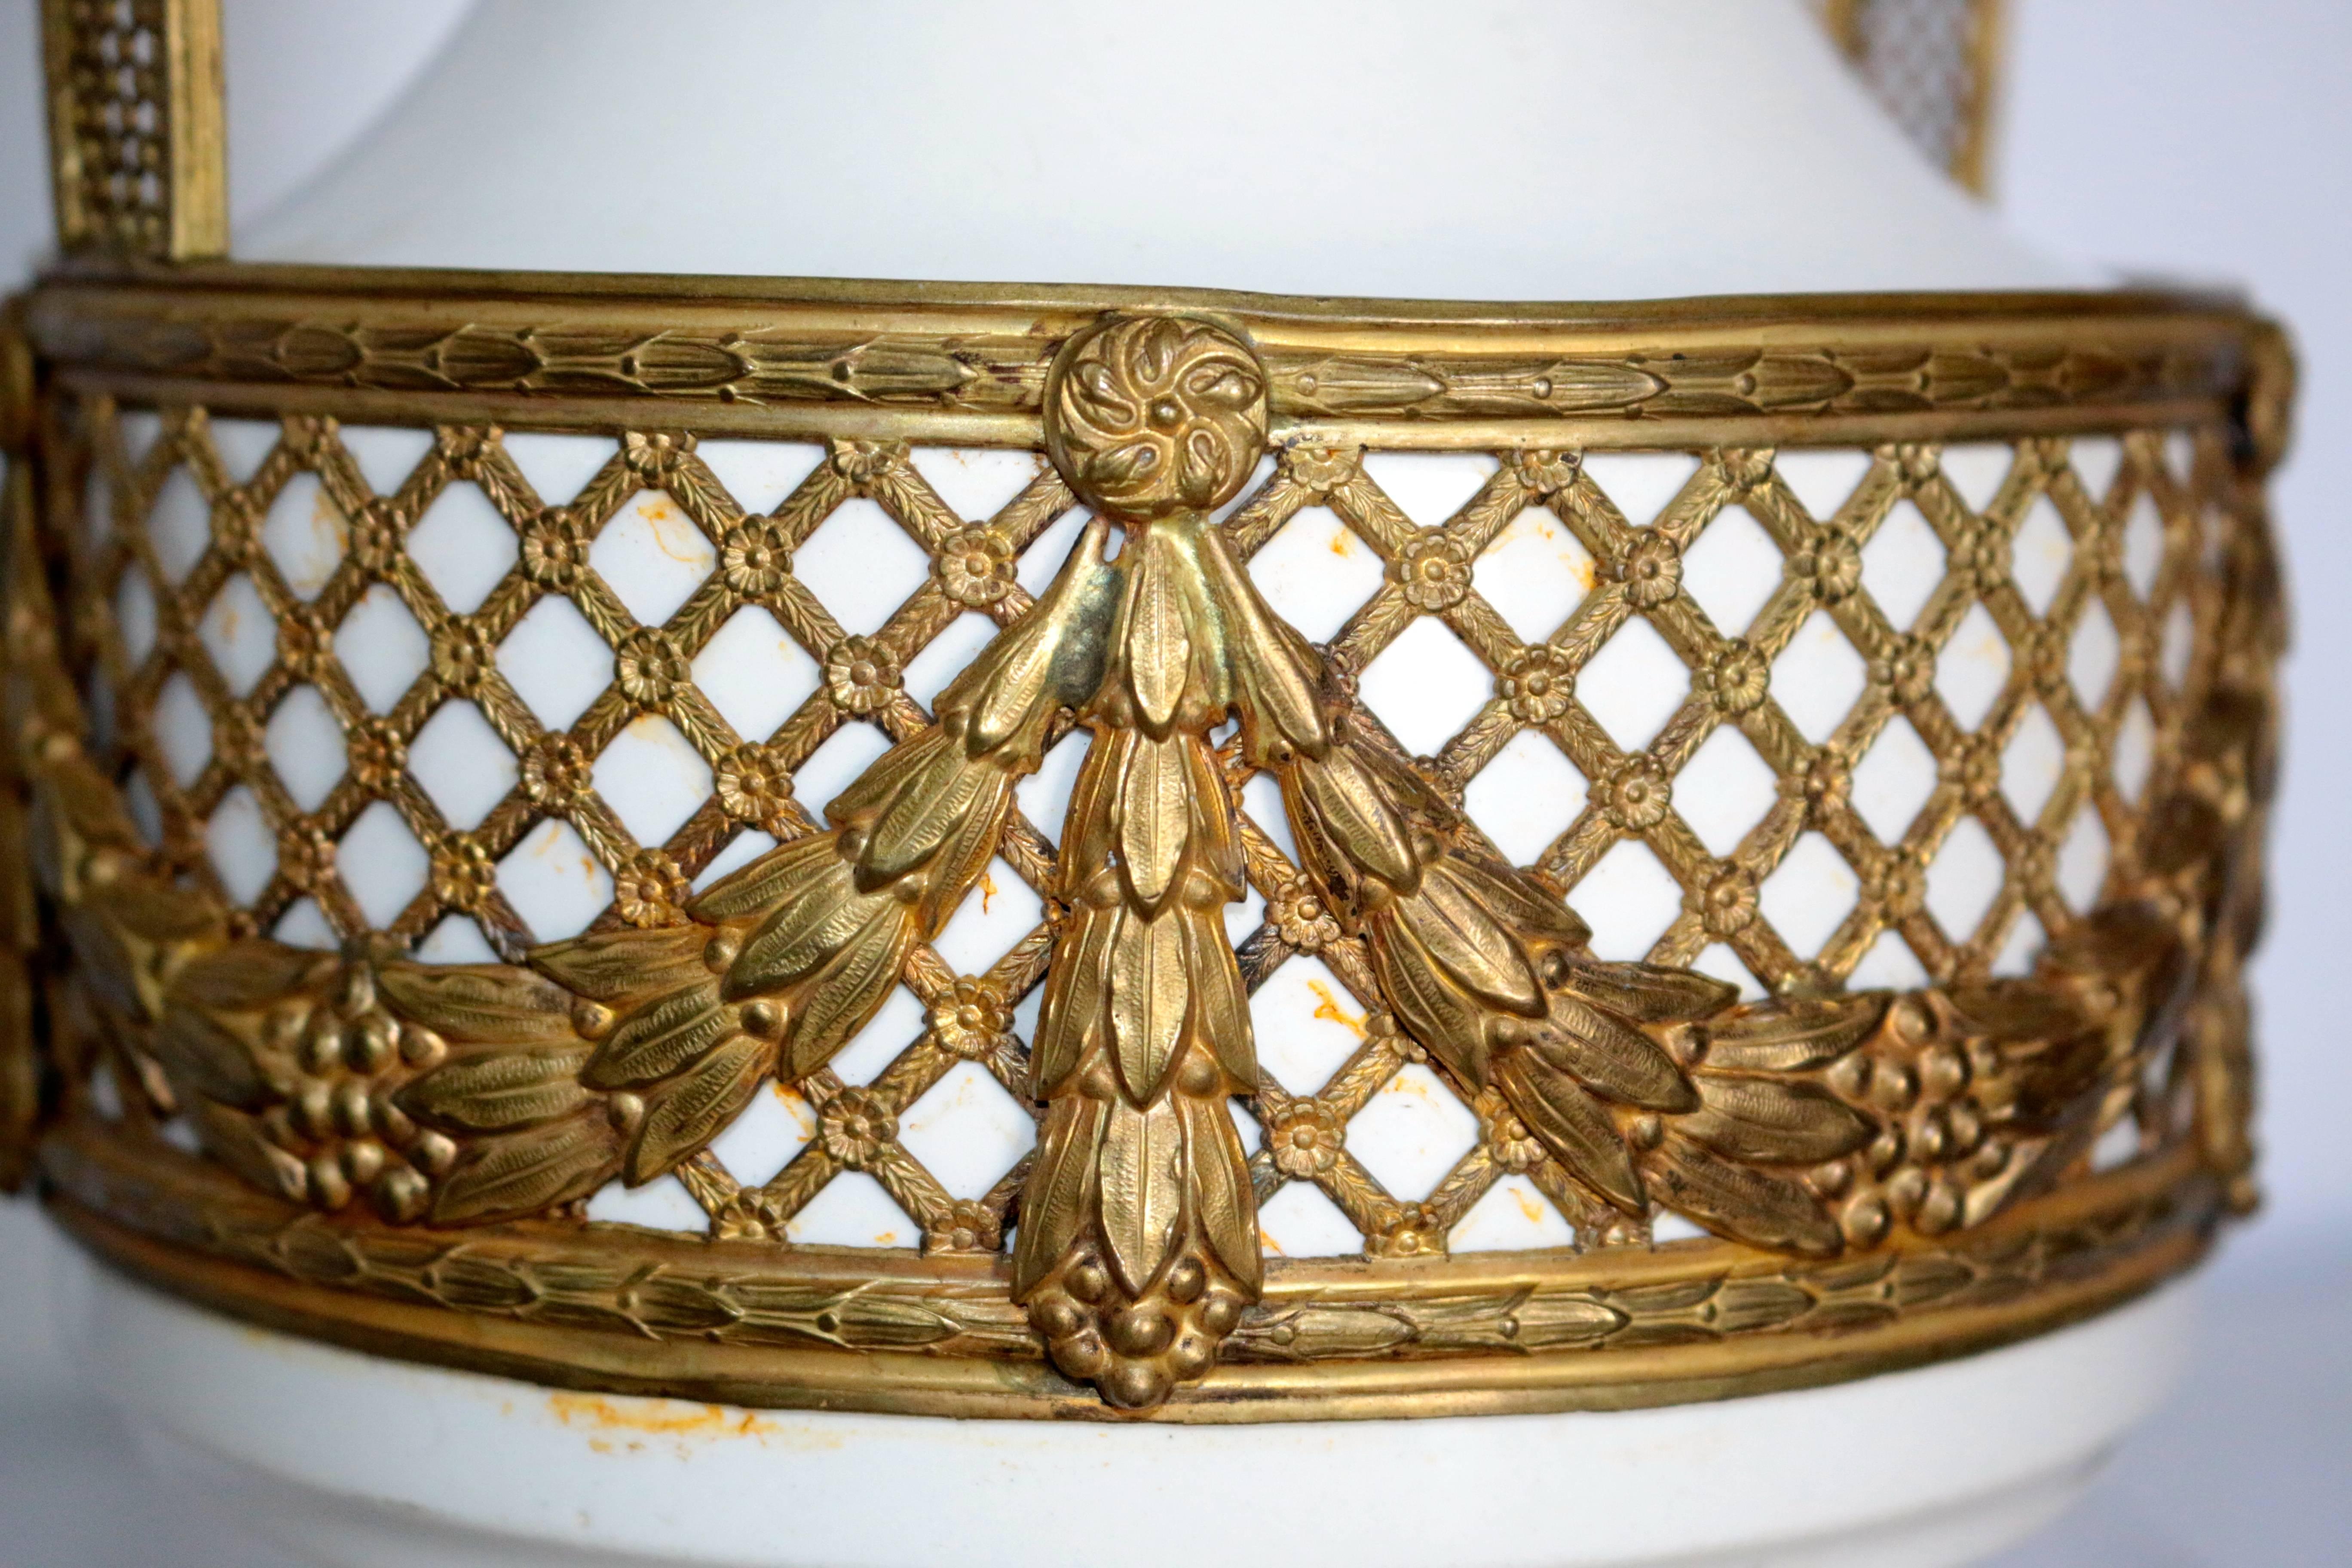 This Amazing 19th century French vase is stunning. The removable bronze trim has an intricate design that goes down to the smallest detail in the trim. From the ivy with the ribbons to the gilt frame fence. This beautiful vase can lighten up and